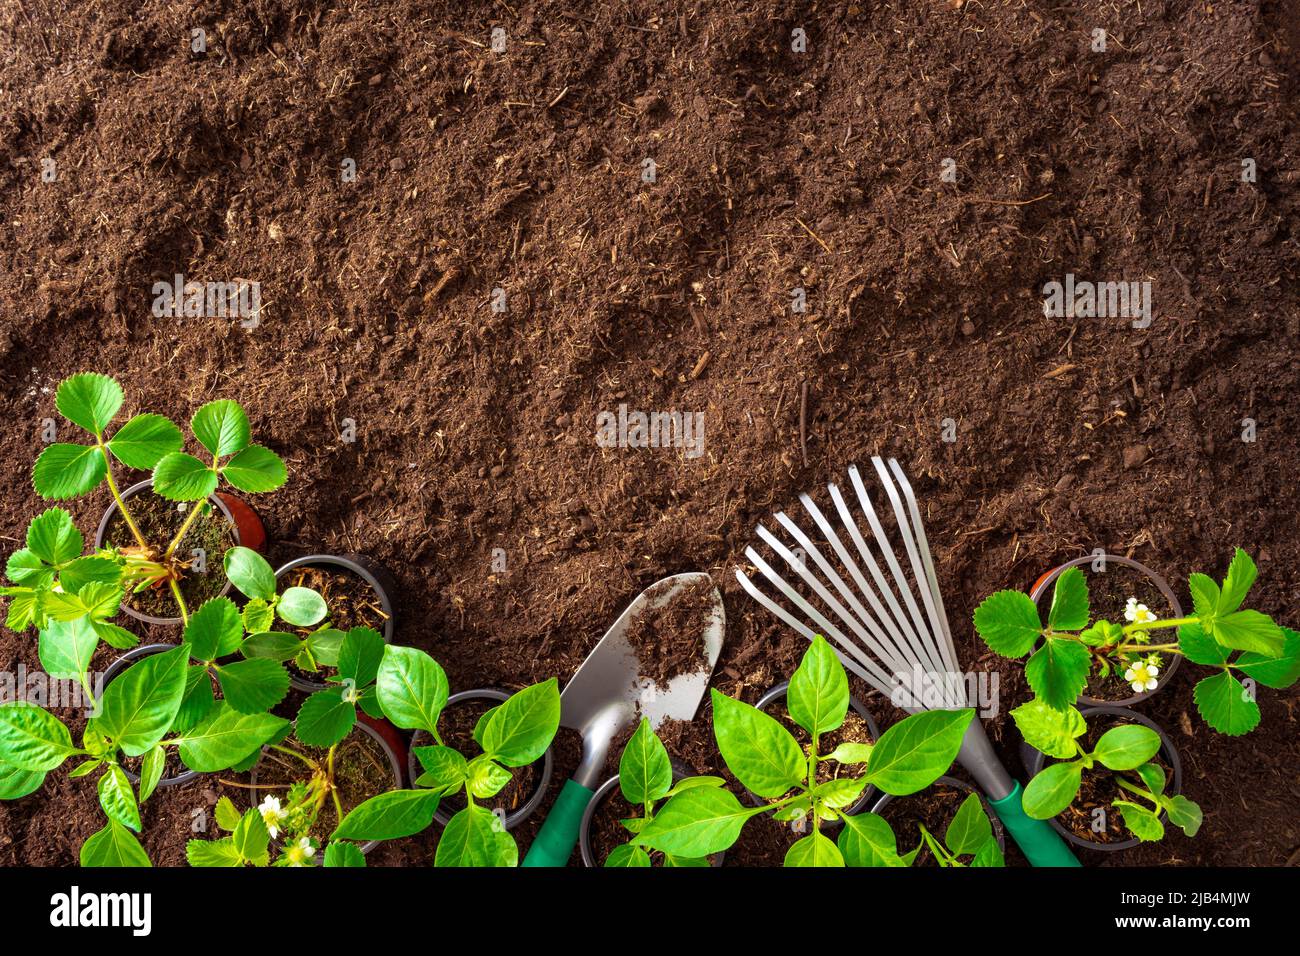 Top View of gardening tools and seedlings on soil Stock Photo